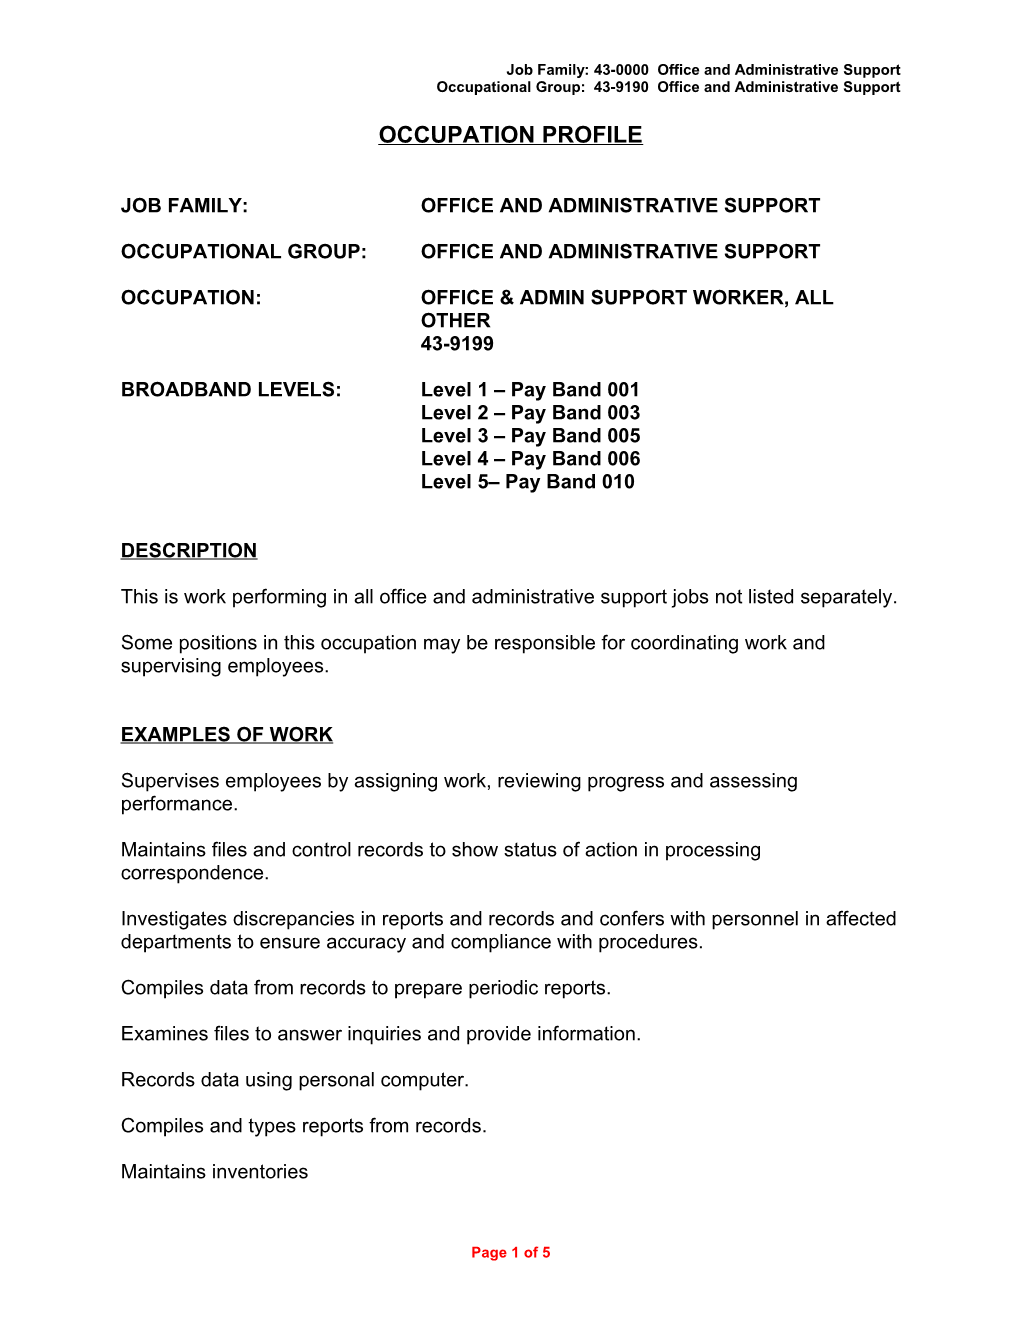 Job Family: 43-0000 Office and Administrative Support s1